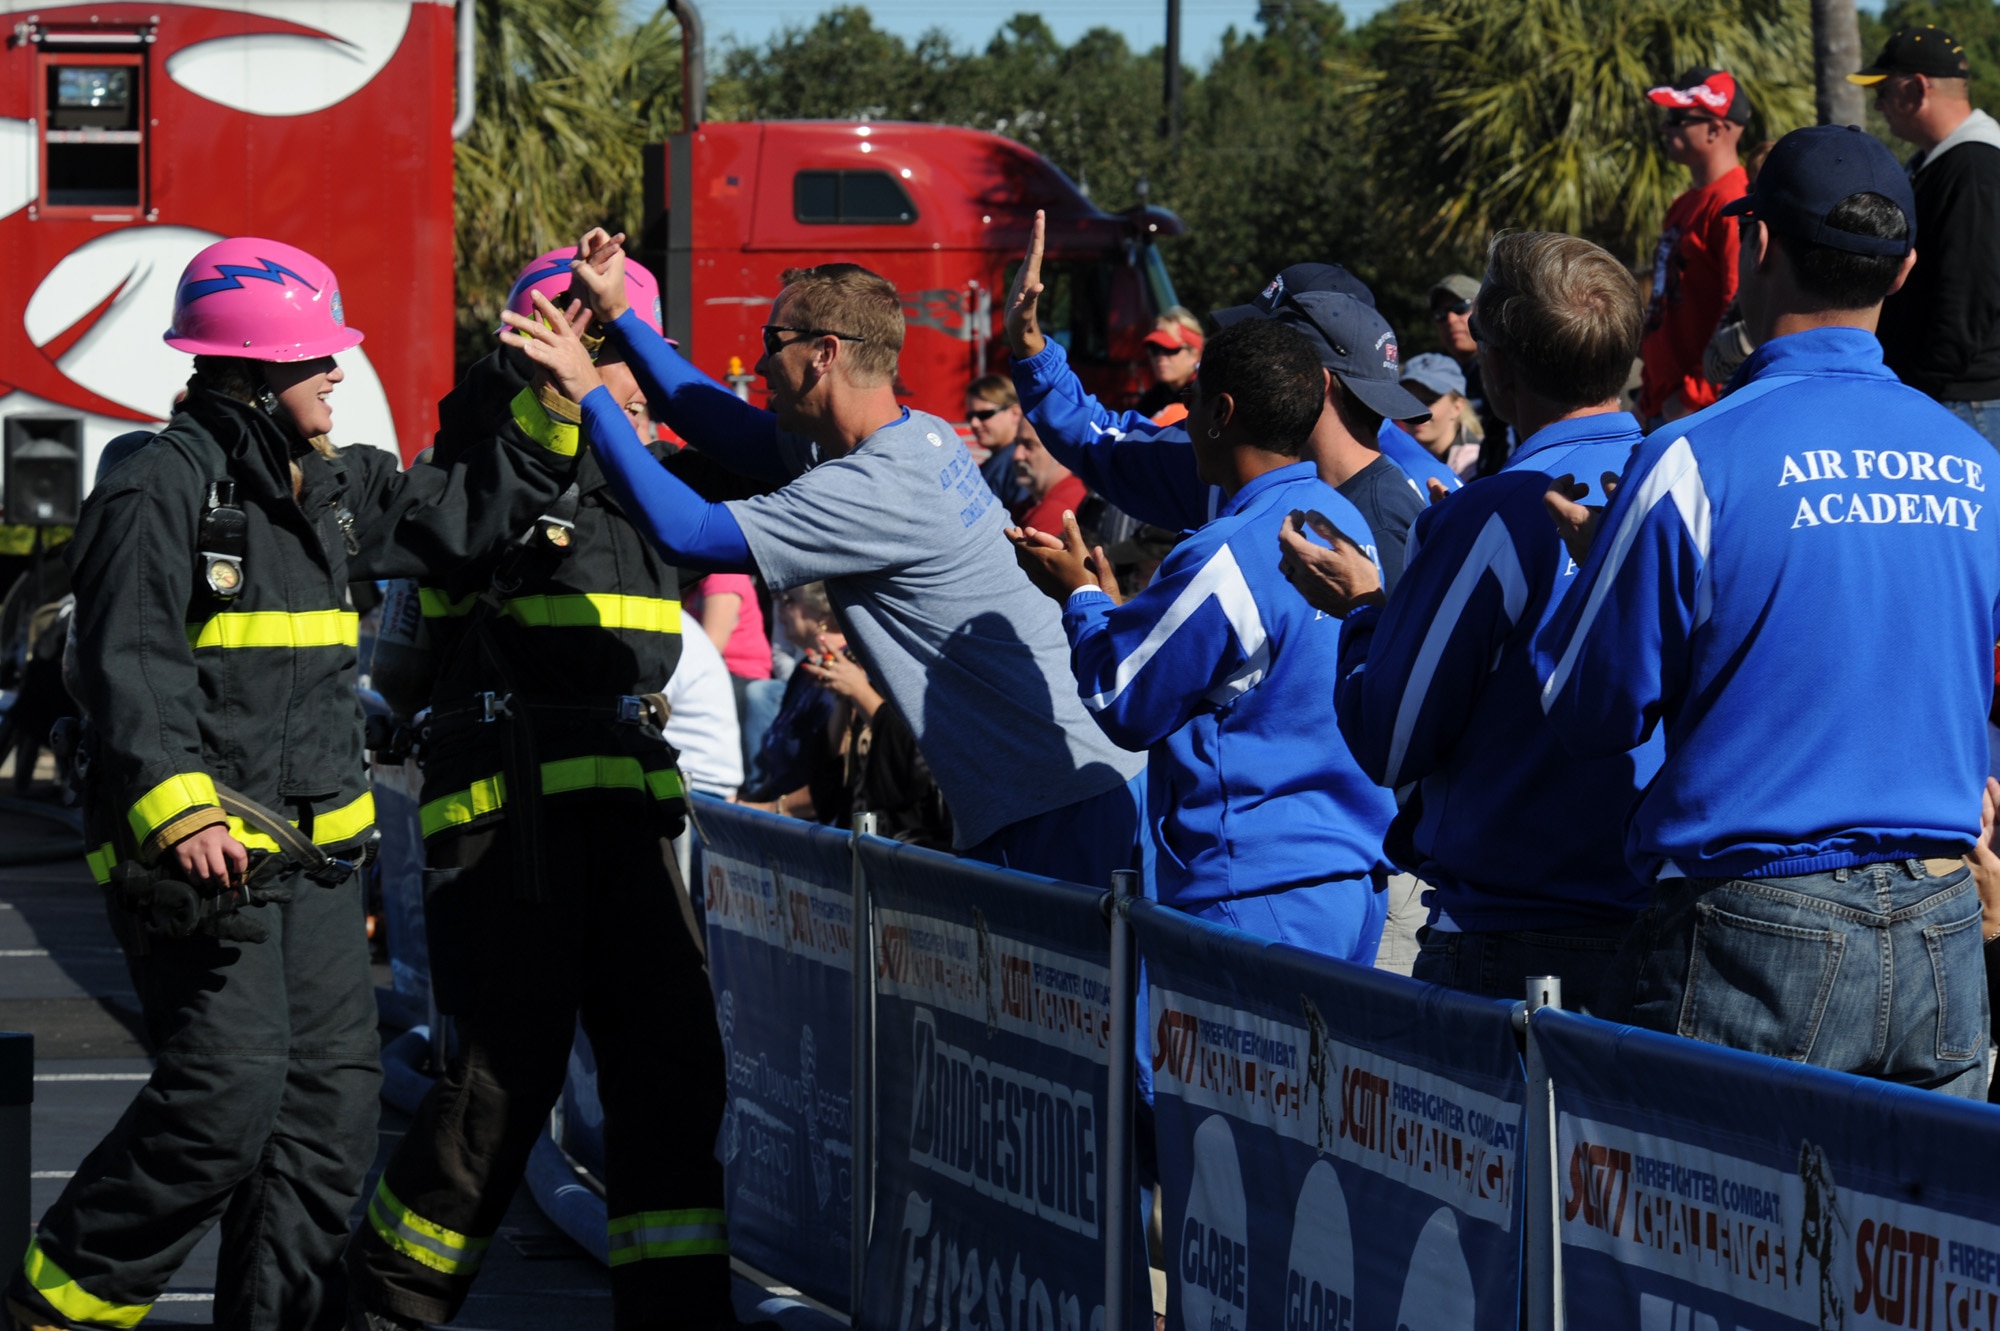 Senior Airman Jessica Morehouse and Stacy Billapando are congratulated by their Air Force Academy teammates after they completed the tandem event at the Scott Firefighter Combat Challenge in Myrtle Beach, S.C., on Nov. 13, 2010. Airman Morehouse is assigned to the Air Force Academy, Colorado Springs, Colo. (U.S. Air Force photo/Staff Sgt. Desiree N. Palacios)